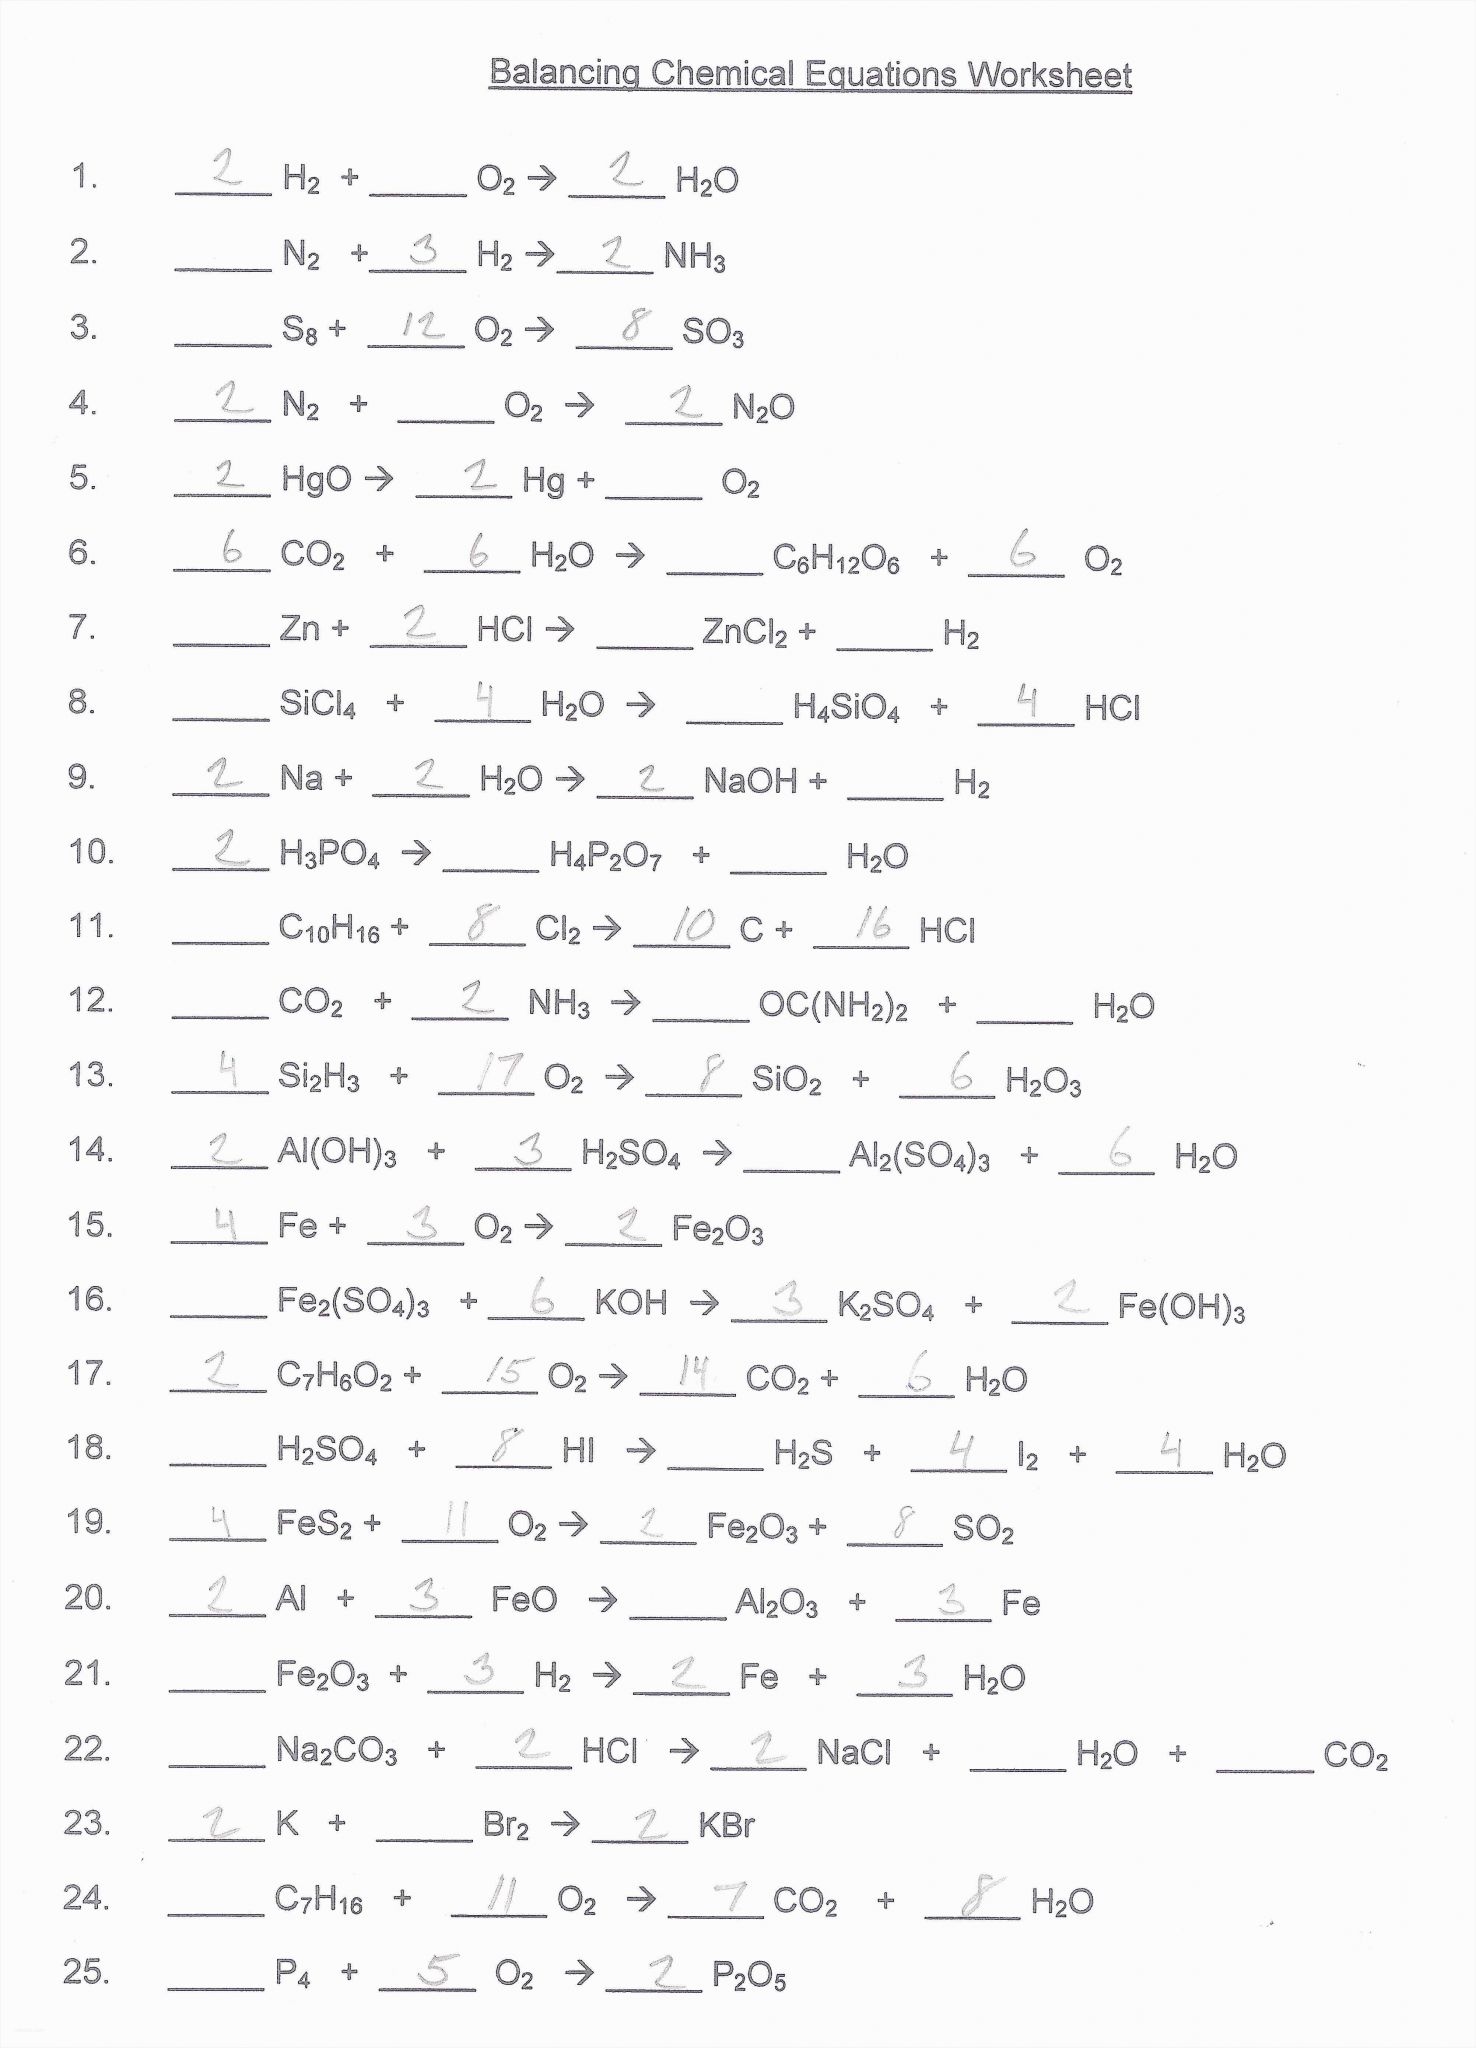 Balancing Chemical Equations Worksheet with Answers Grade 10 or Balancing Chemical Equations Worksheet Answers 1 25 Image